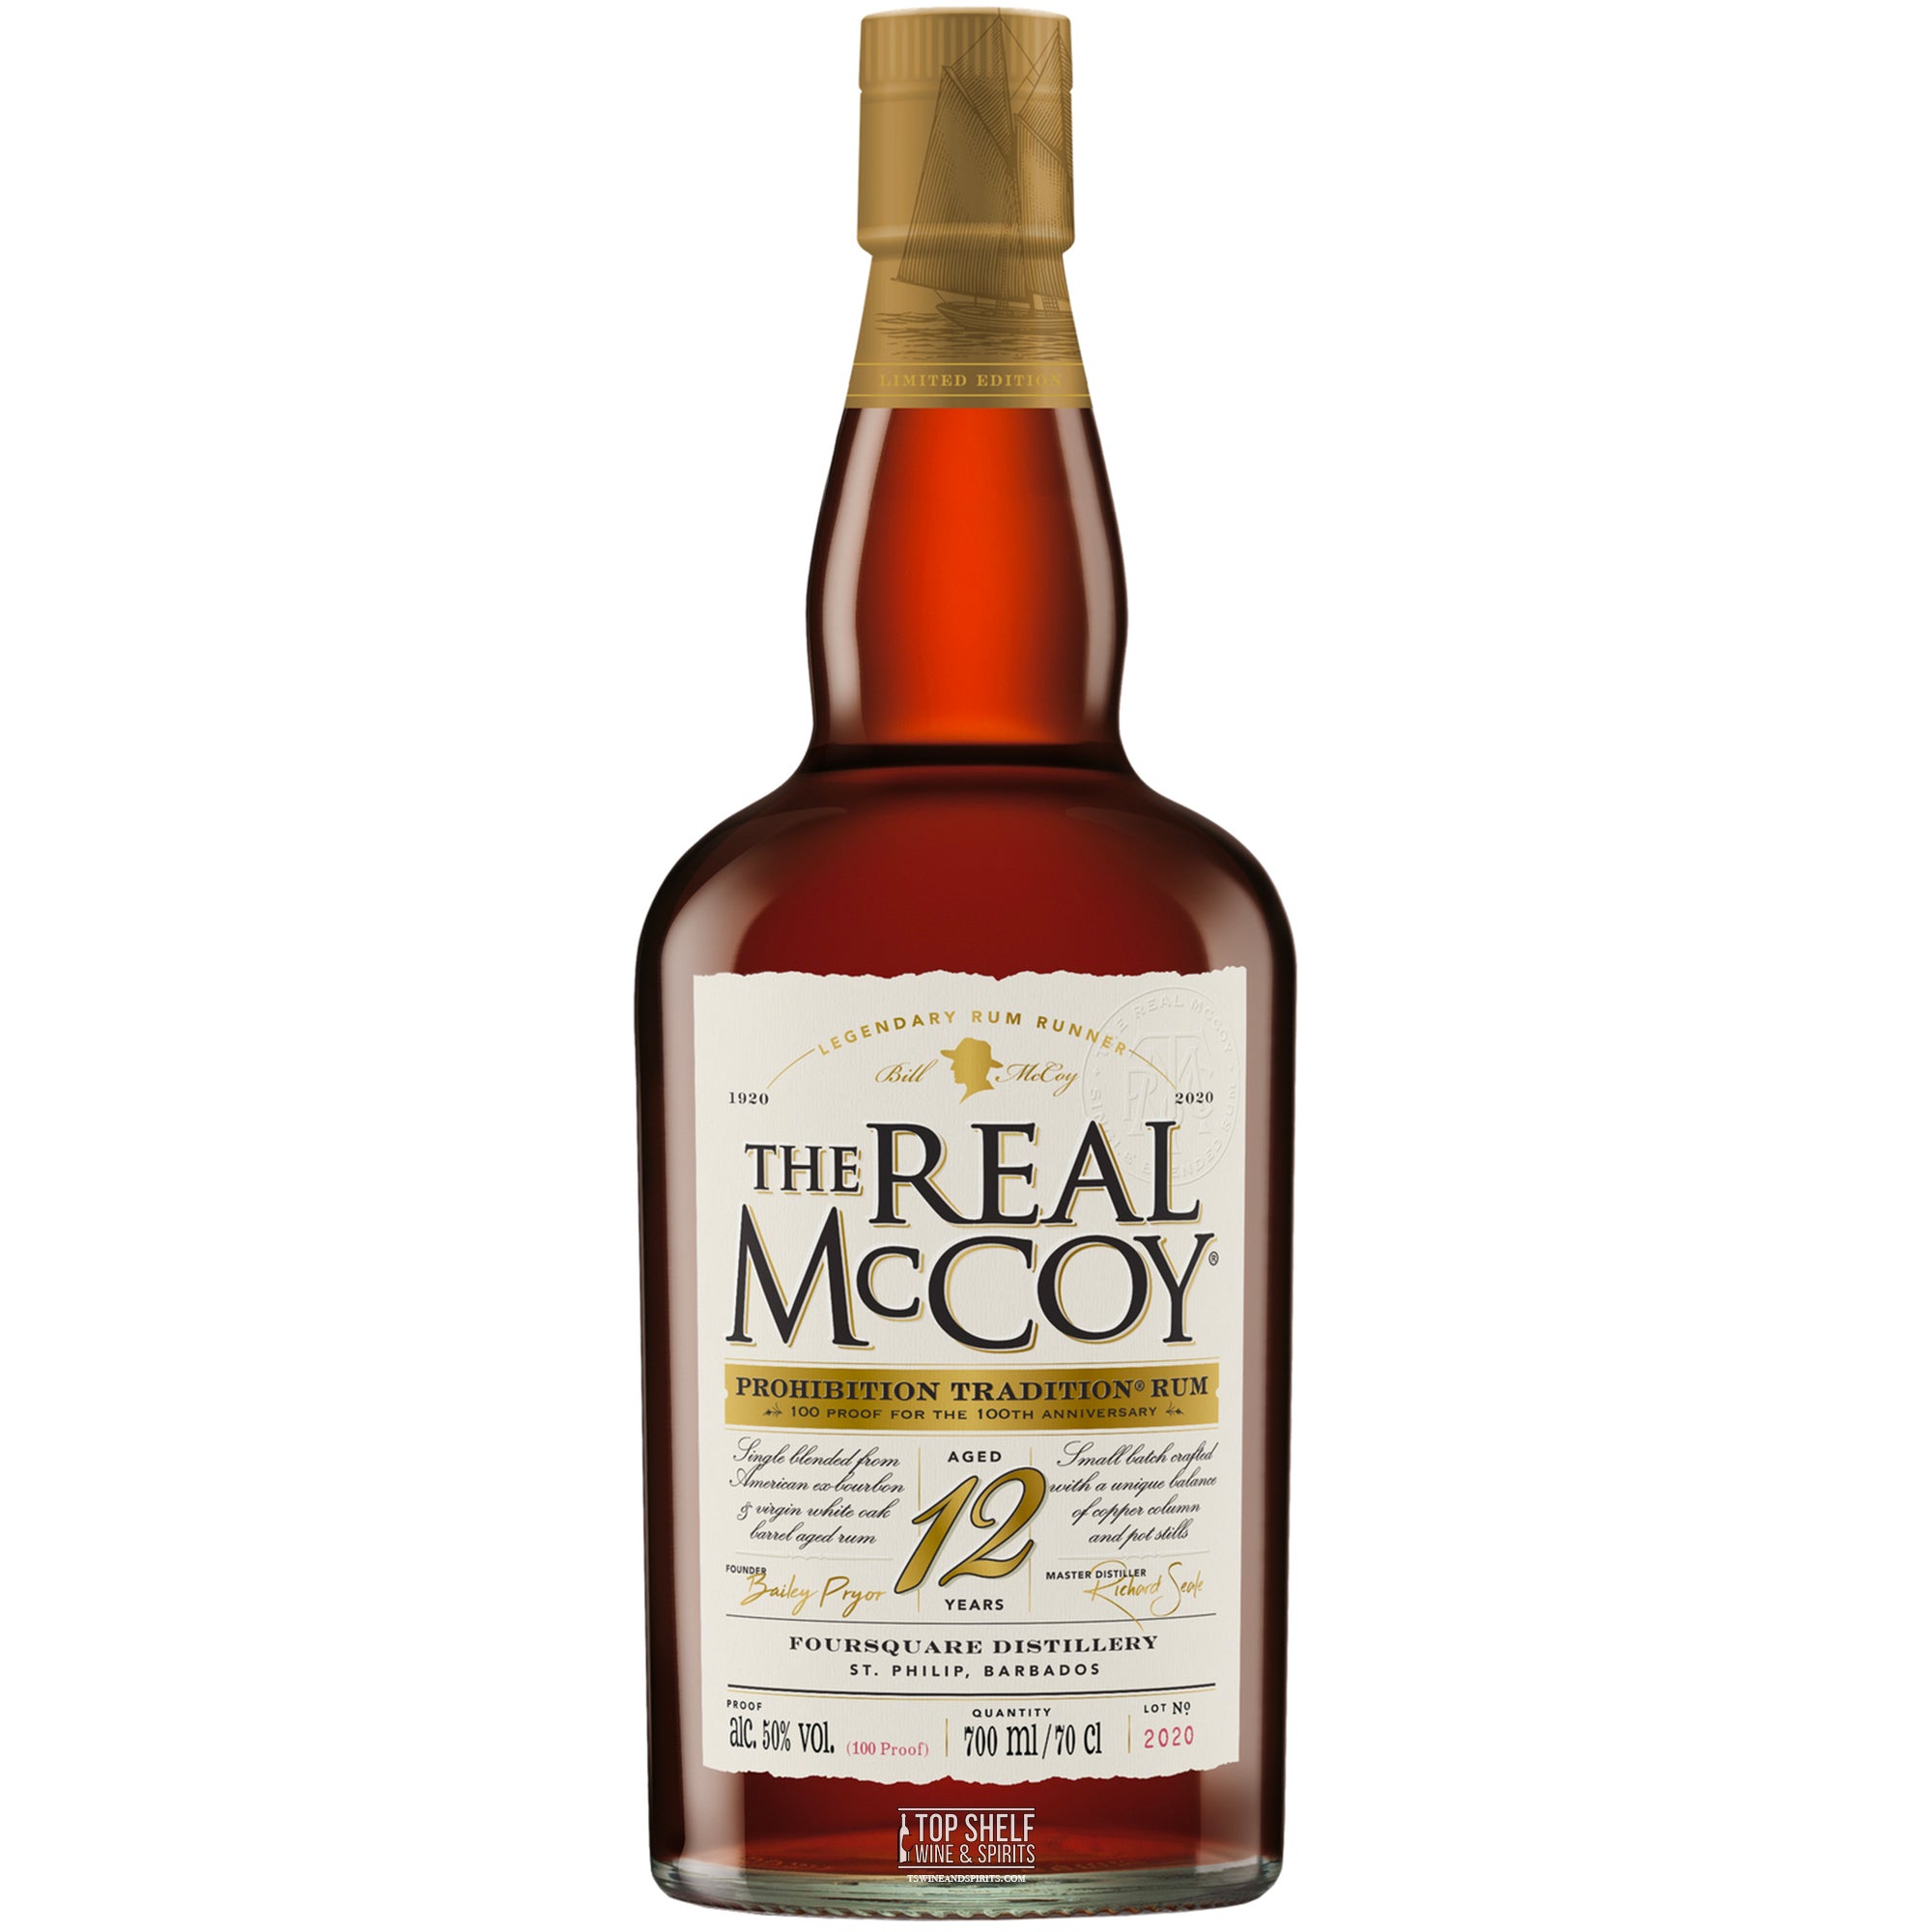 The Real McCoy 12 Year Prohibition Tradition Rum (100th Anniversary)